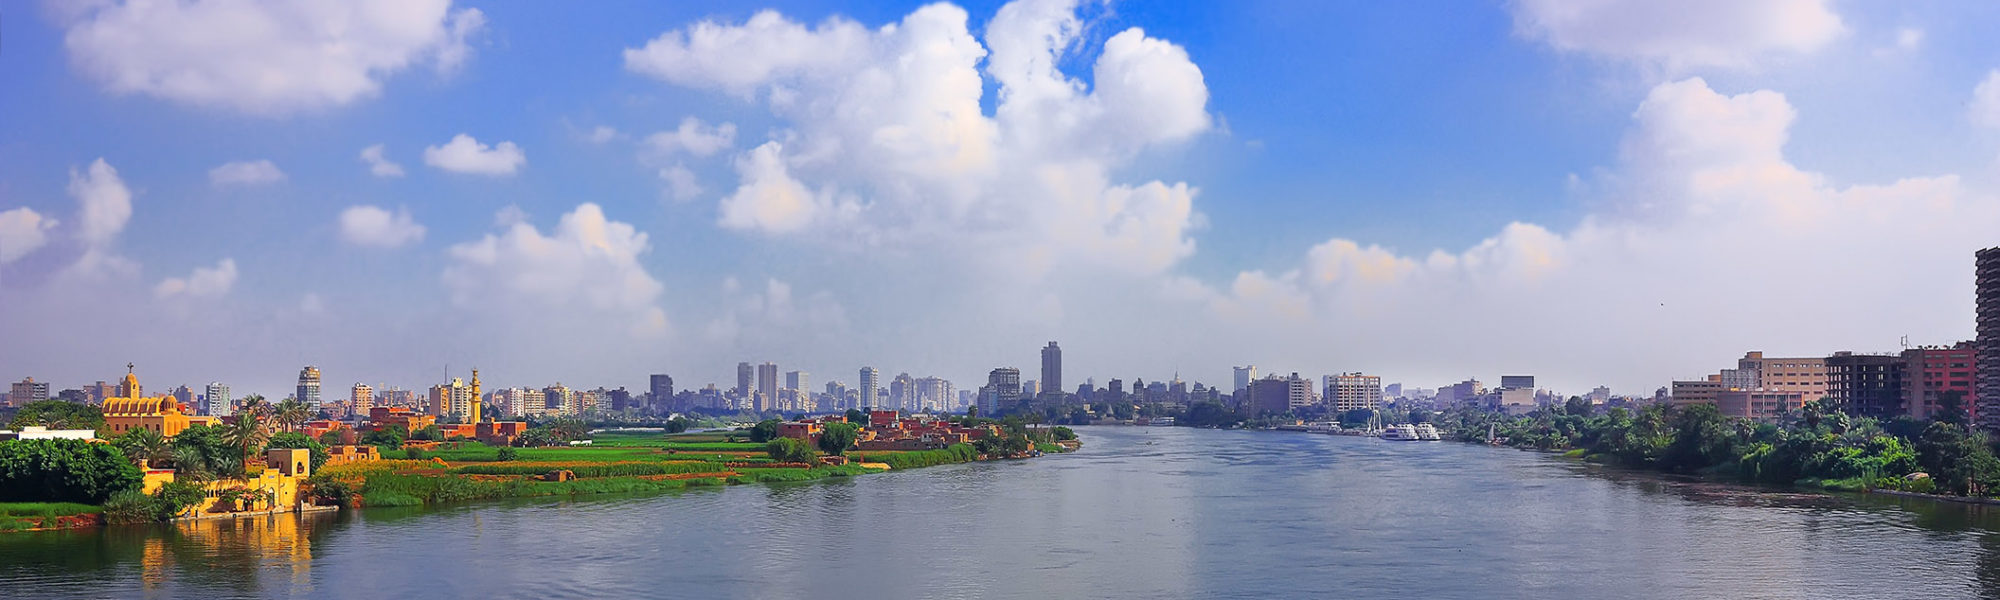 On a river cruise with Jaya Travel & Tours is the Nile river and the downtown of Cairo, Egypt on the horizon.